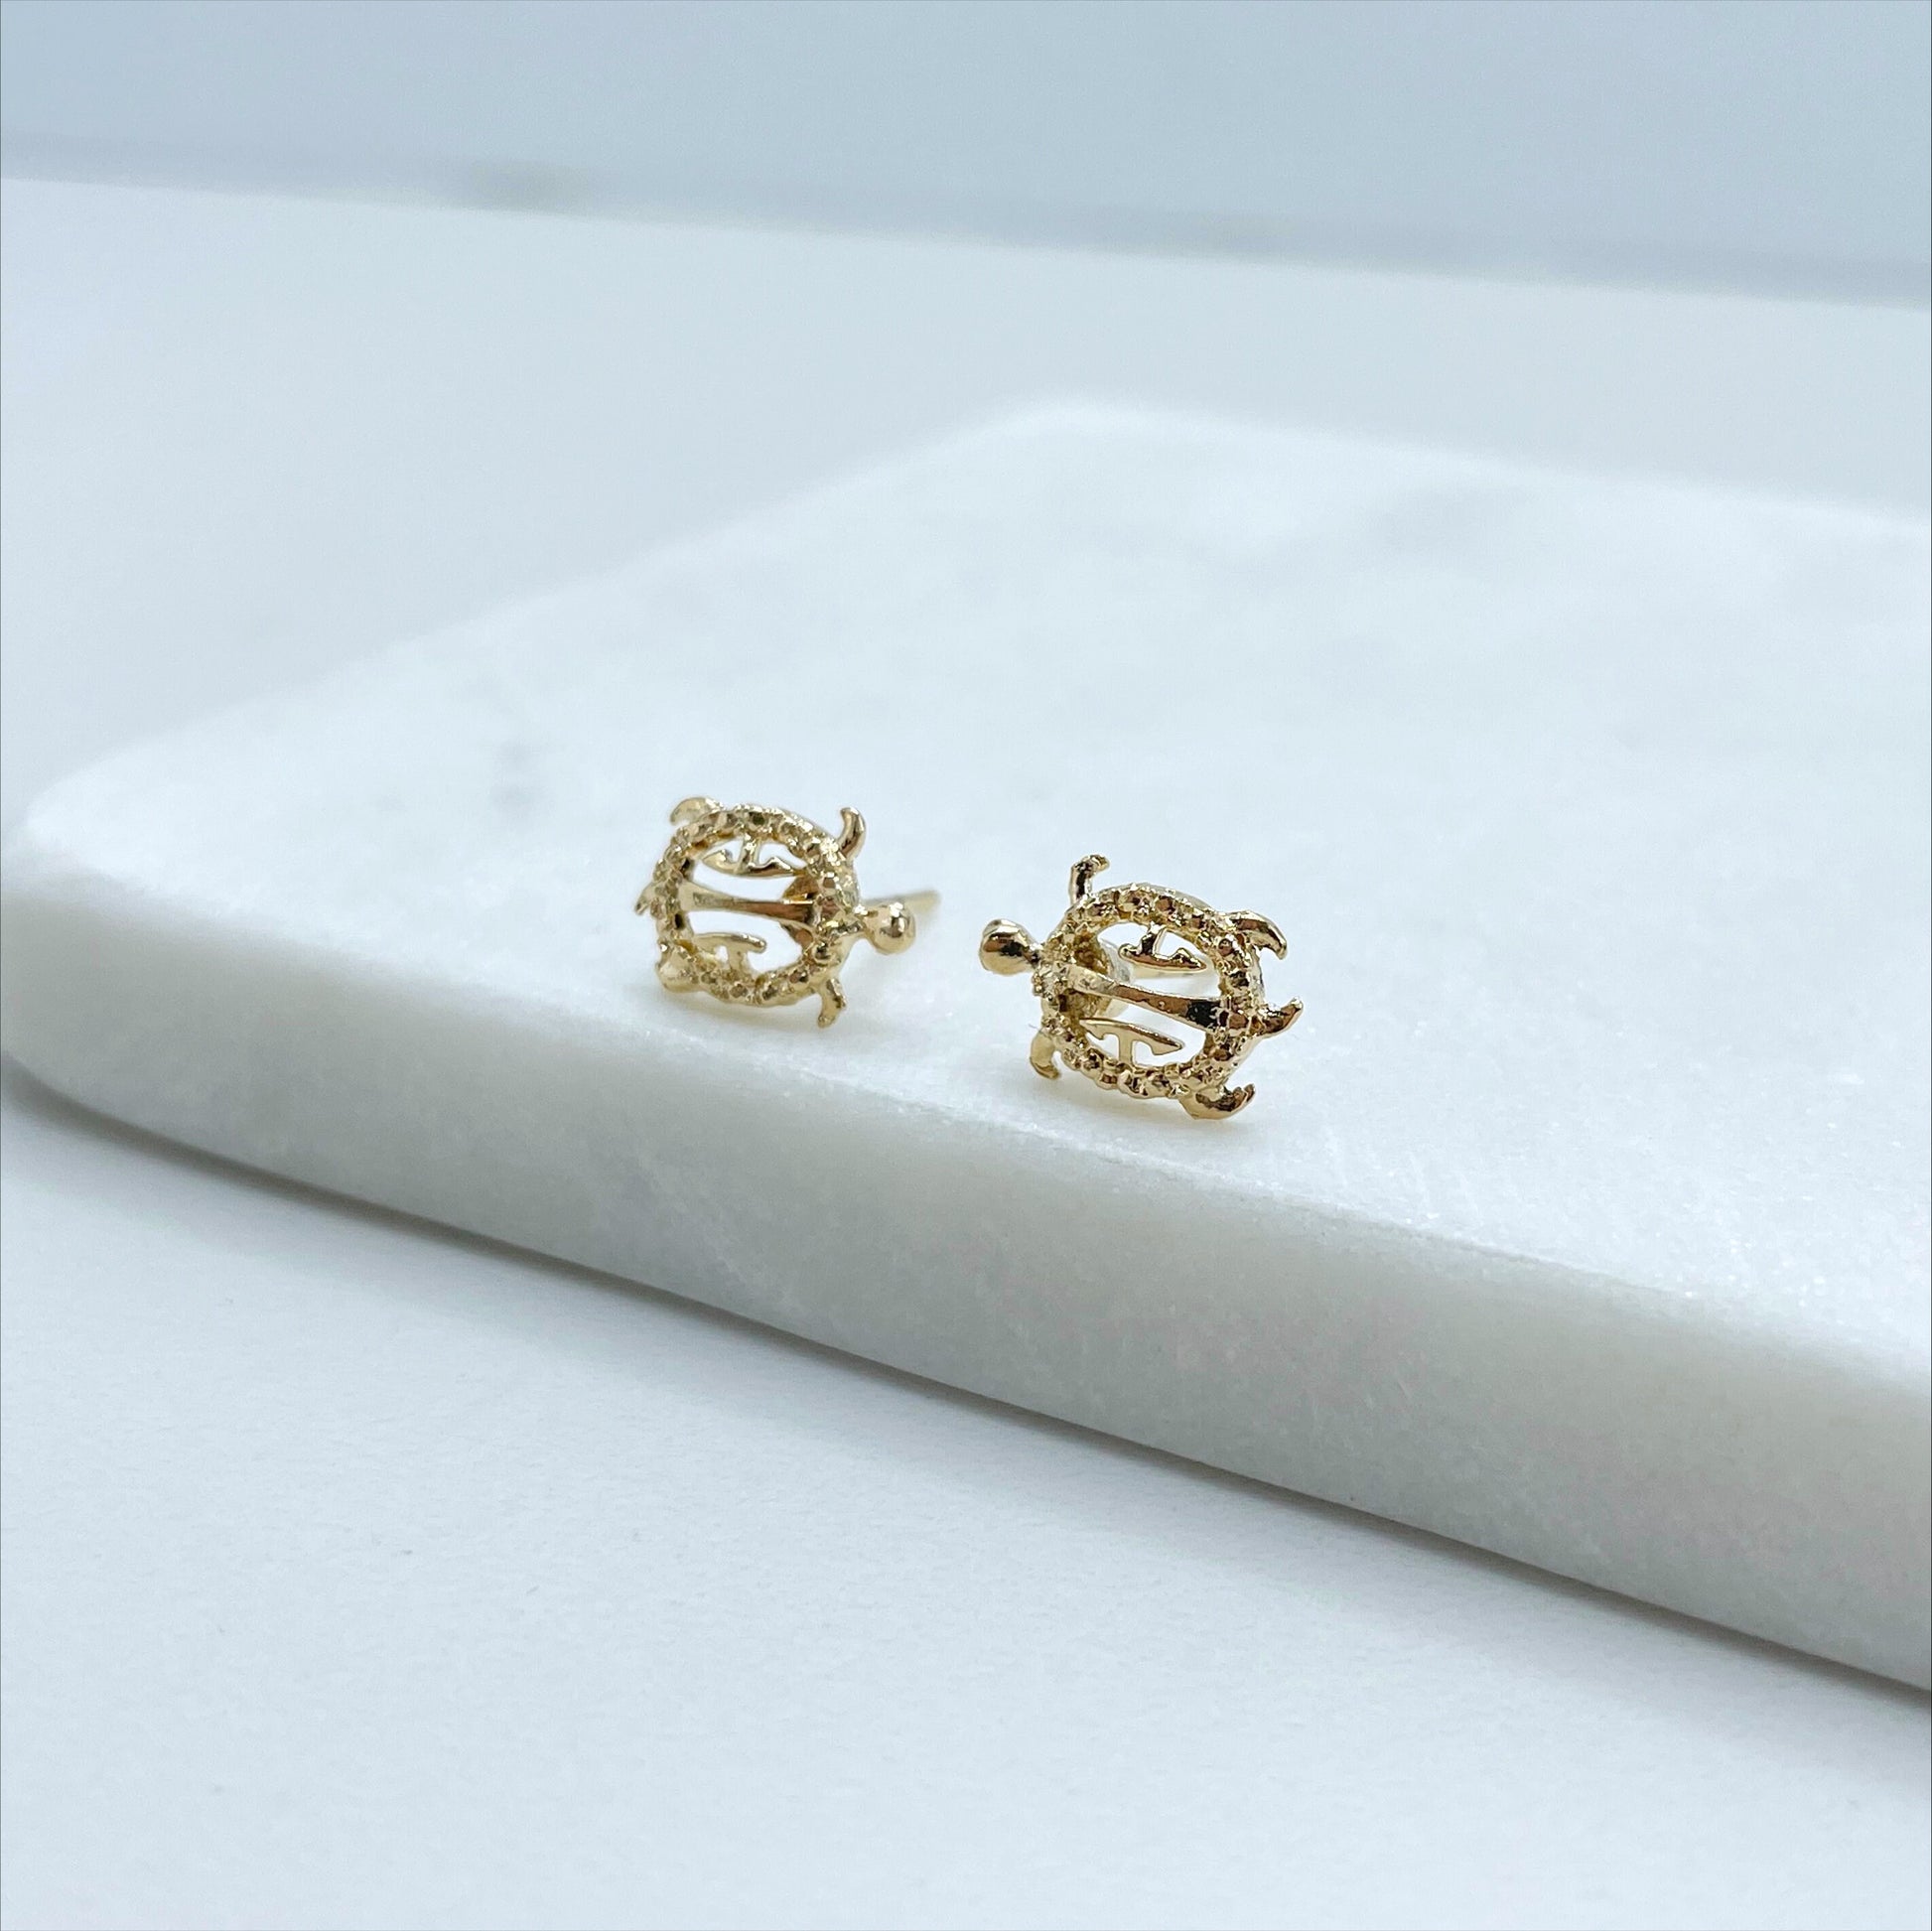 18k Gold Filled Tiny Turtle Stud Earrings Wholesale Jewelry Making Supplies